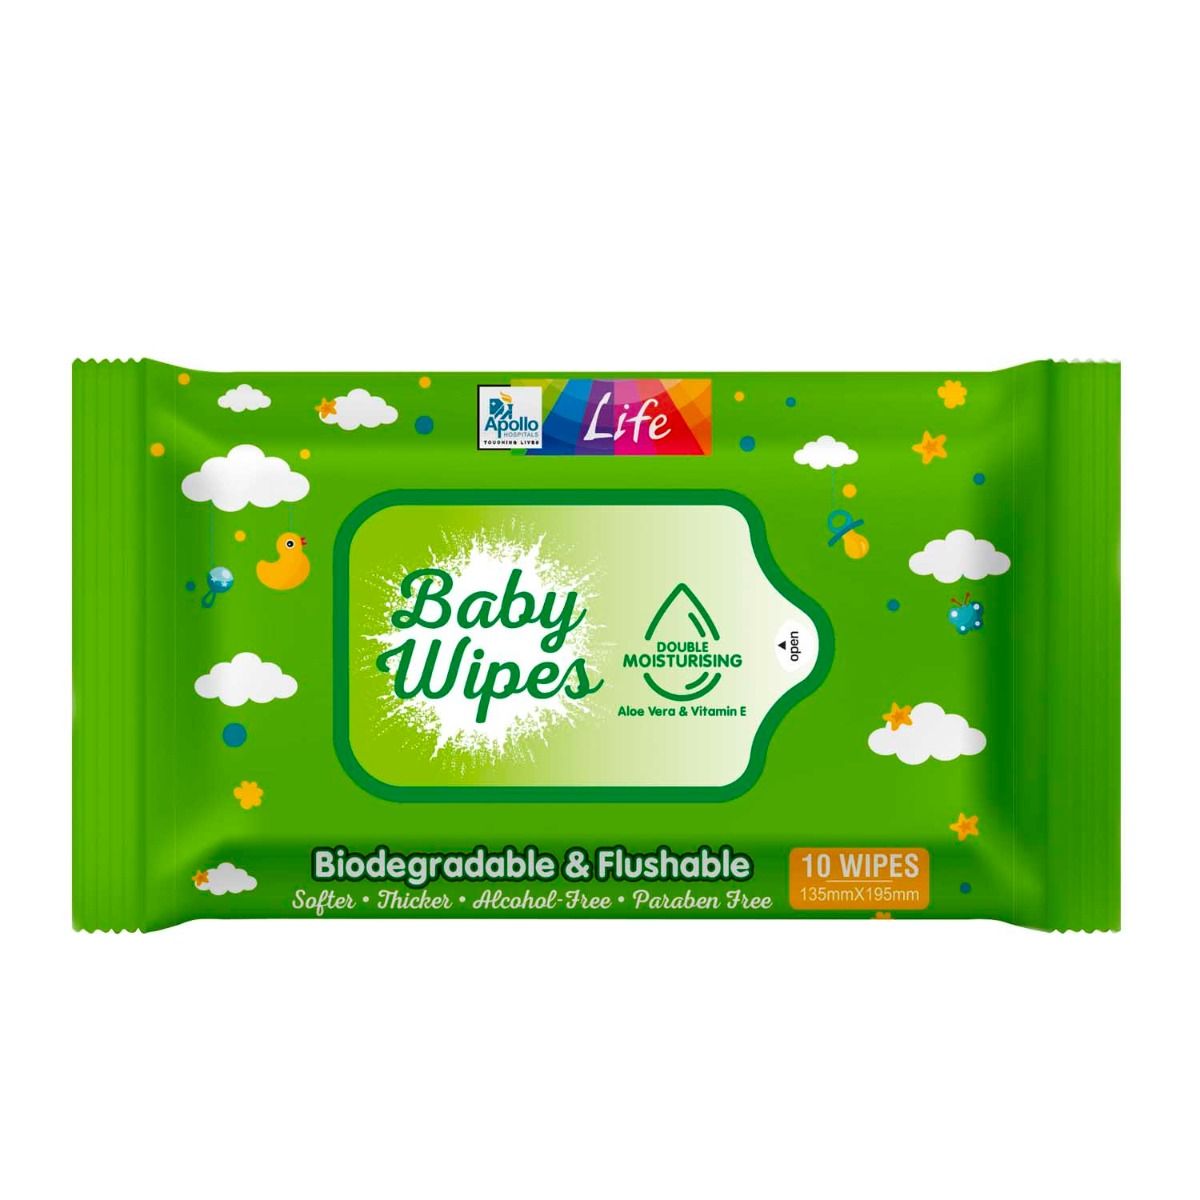 Buy Apollo Pharmacy Biodegradable & Flushable Baby Wipes, 10 Count Online